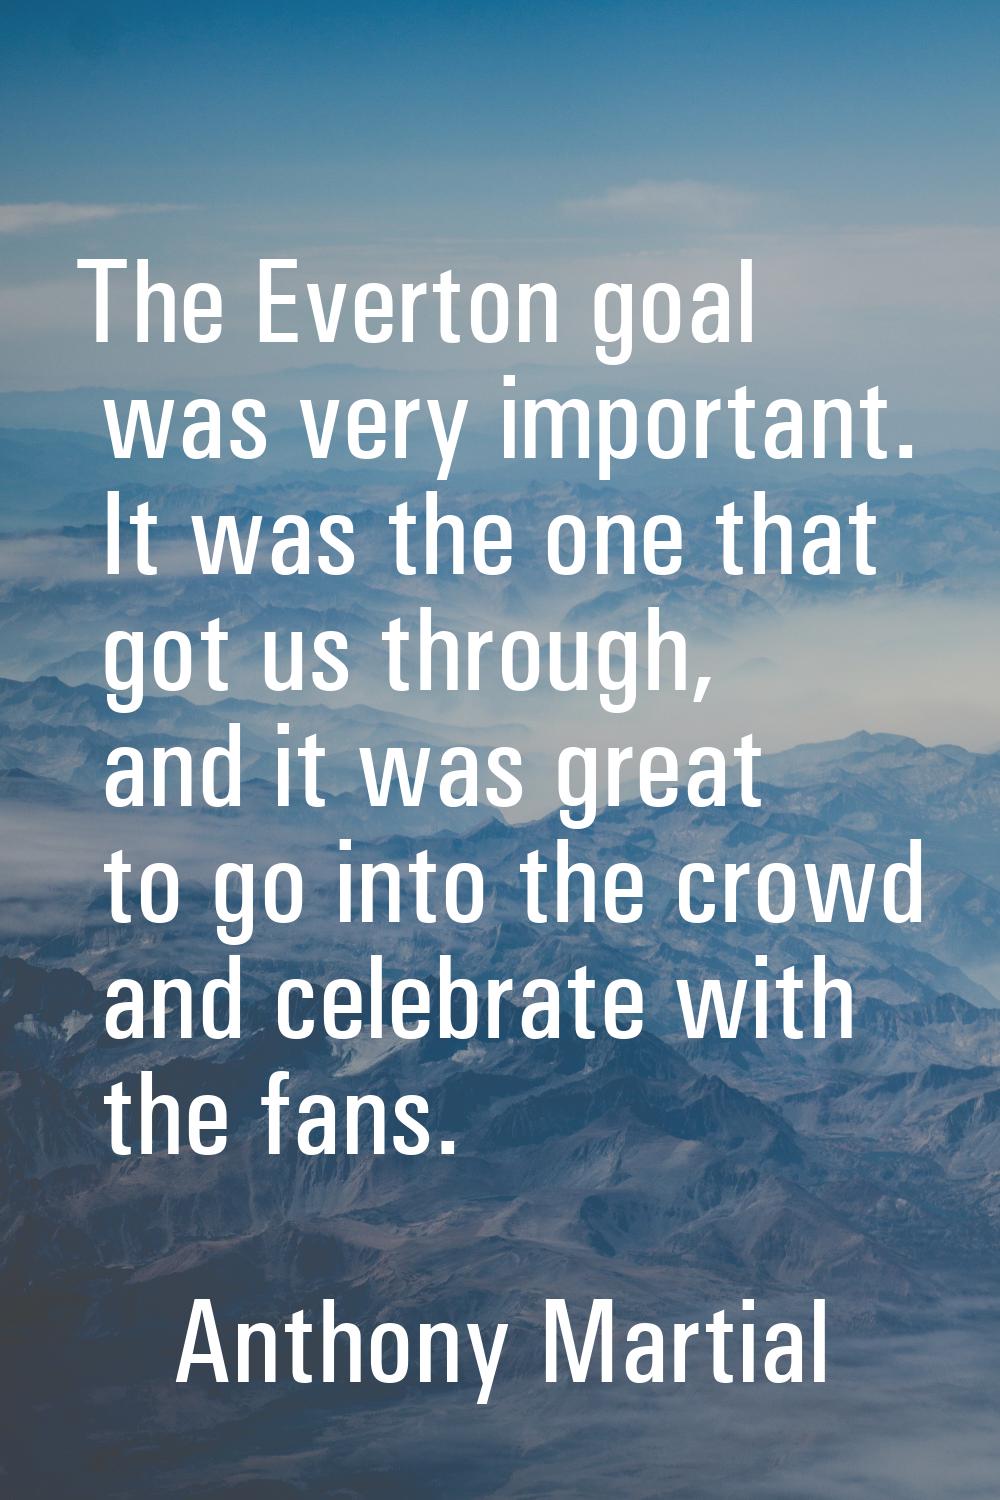 The Everton goal was very important. It was the one that got us through, and it was great to go int